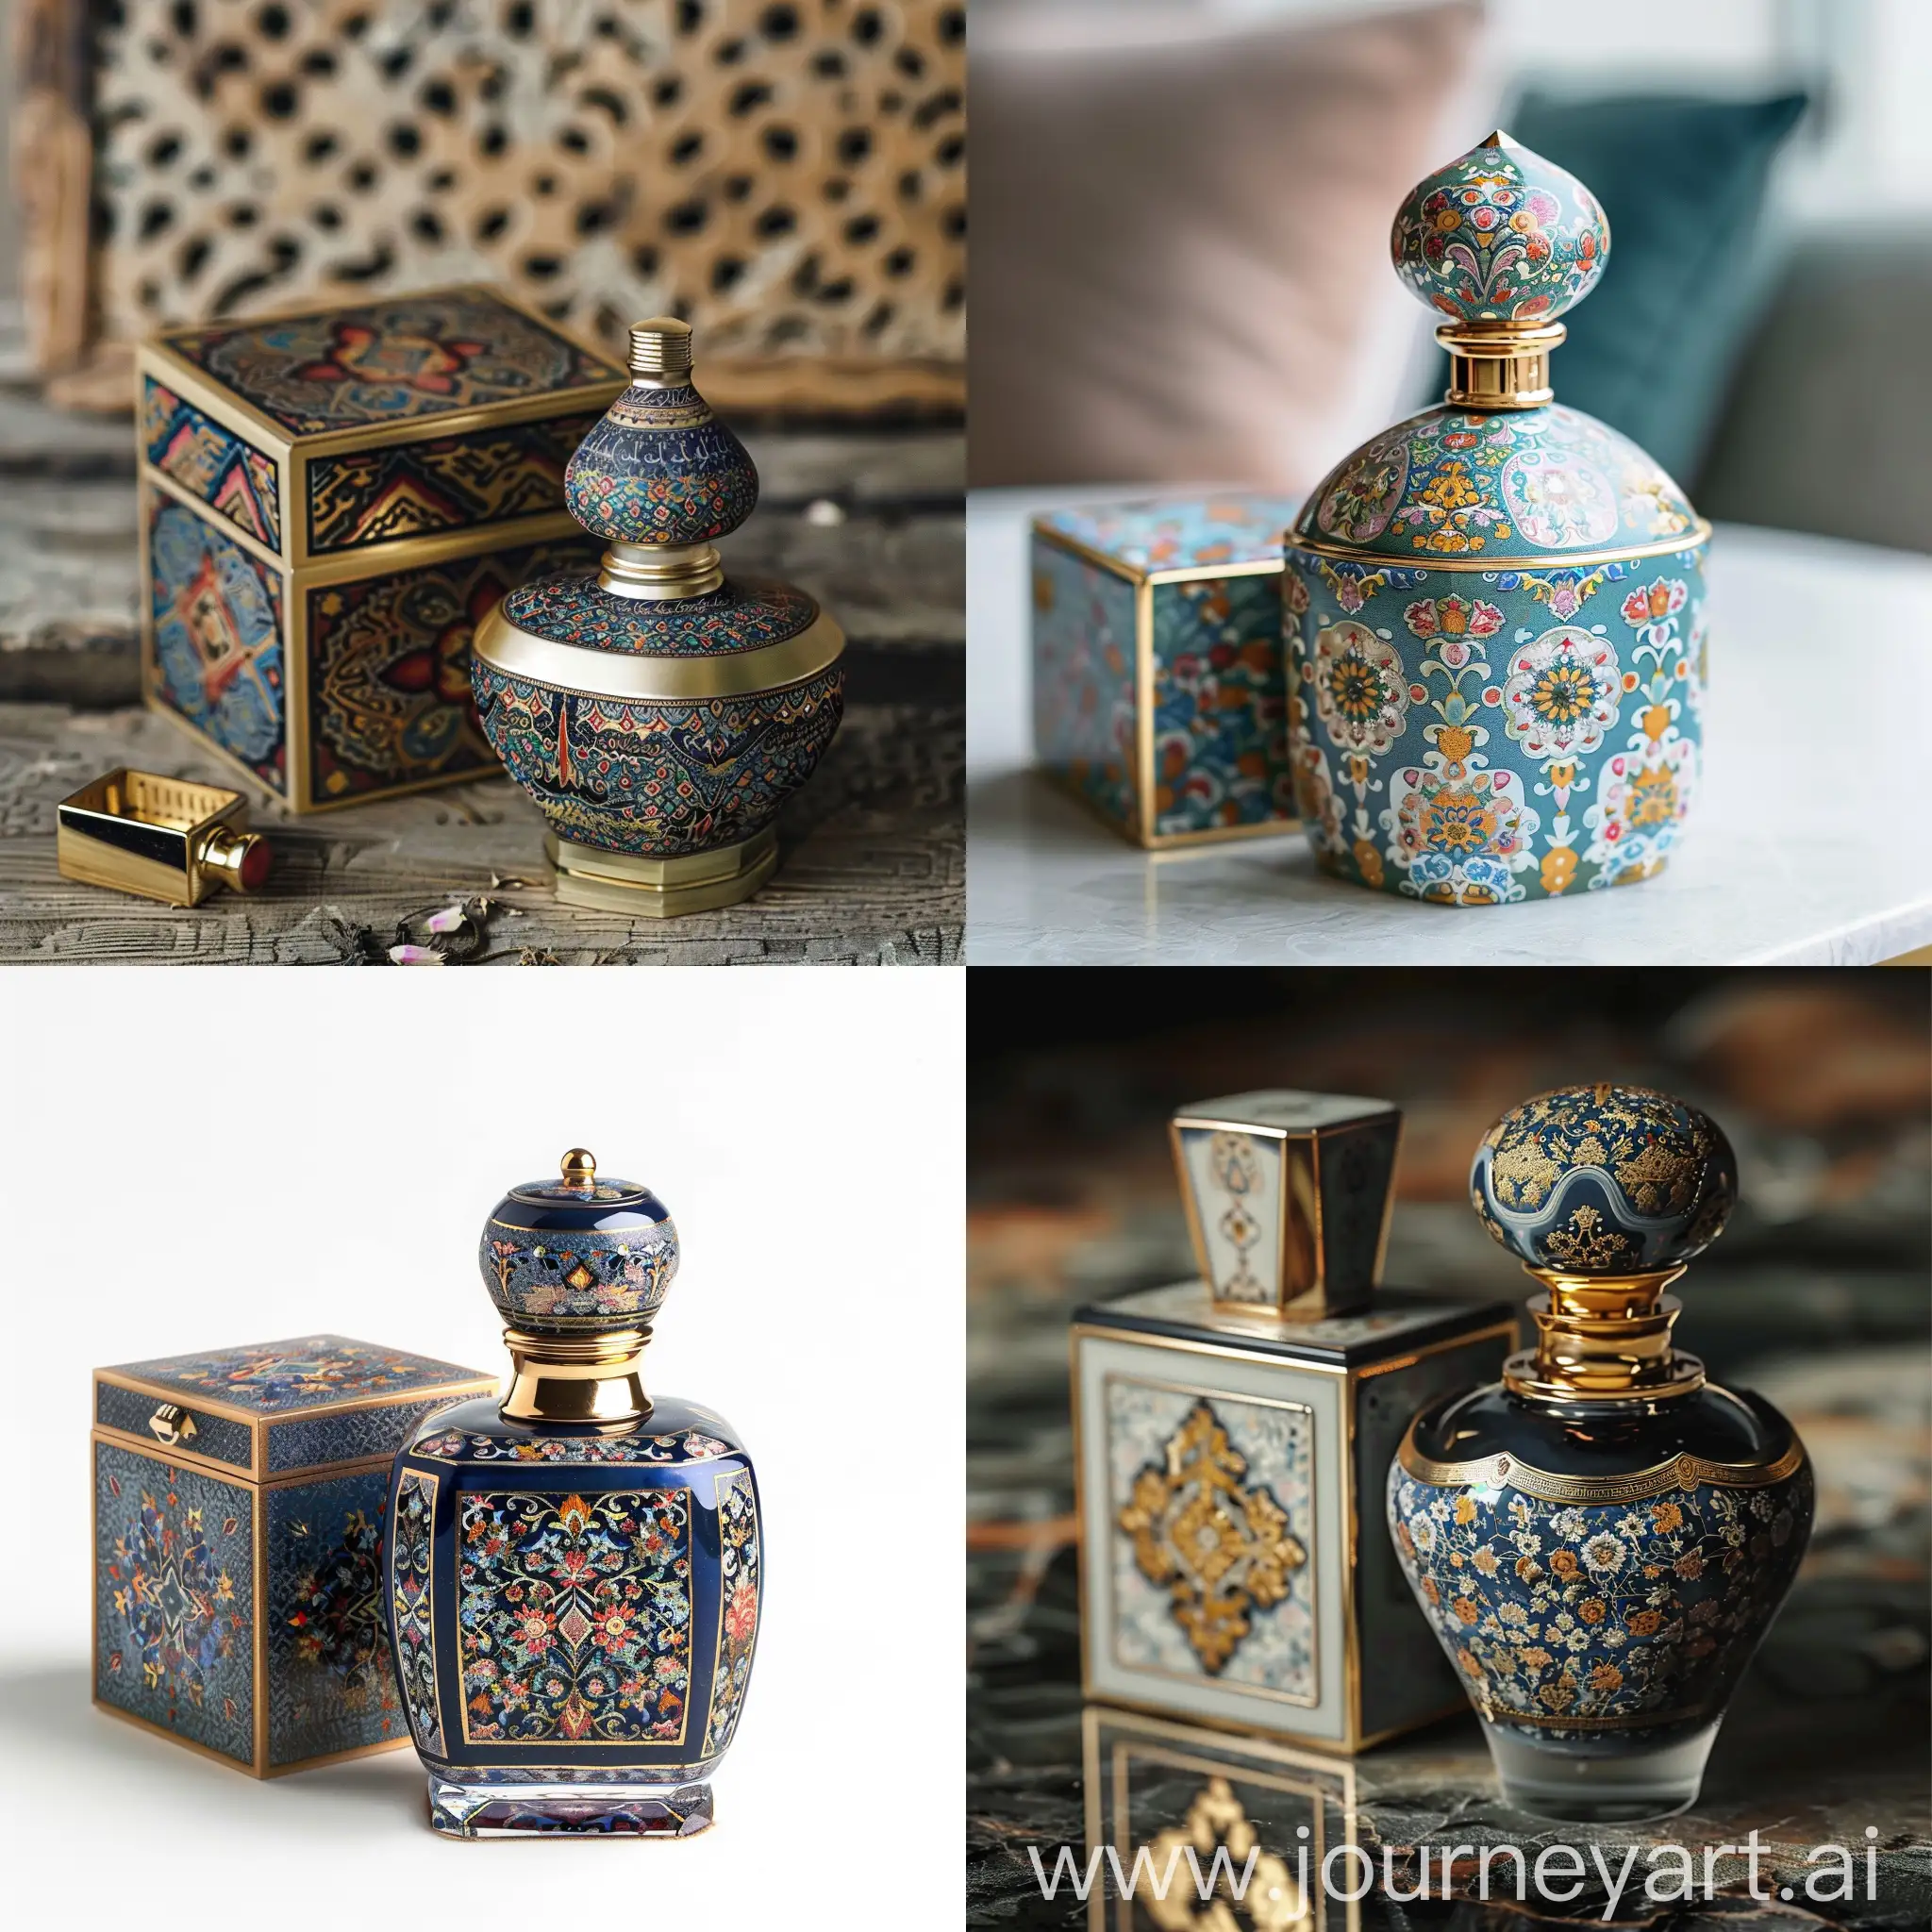 perfume bottle and box inspired by iranian art and culture